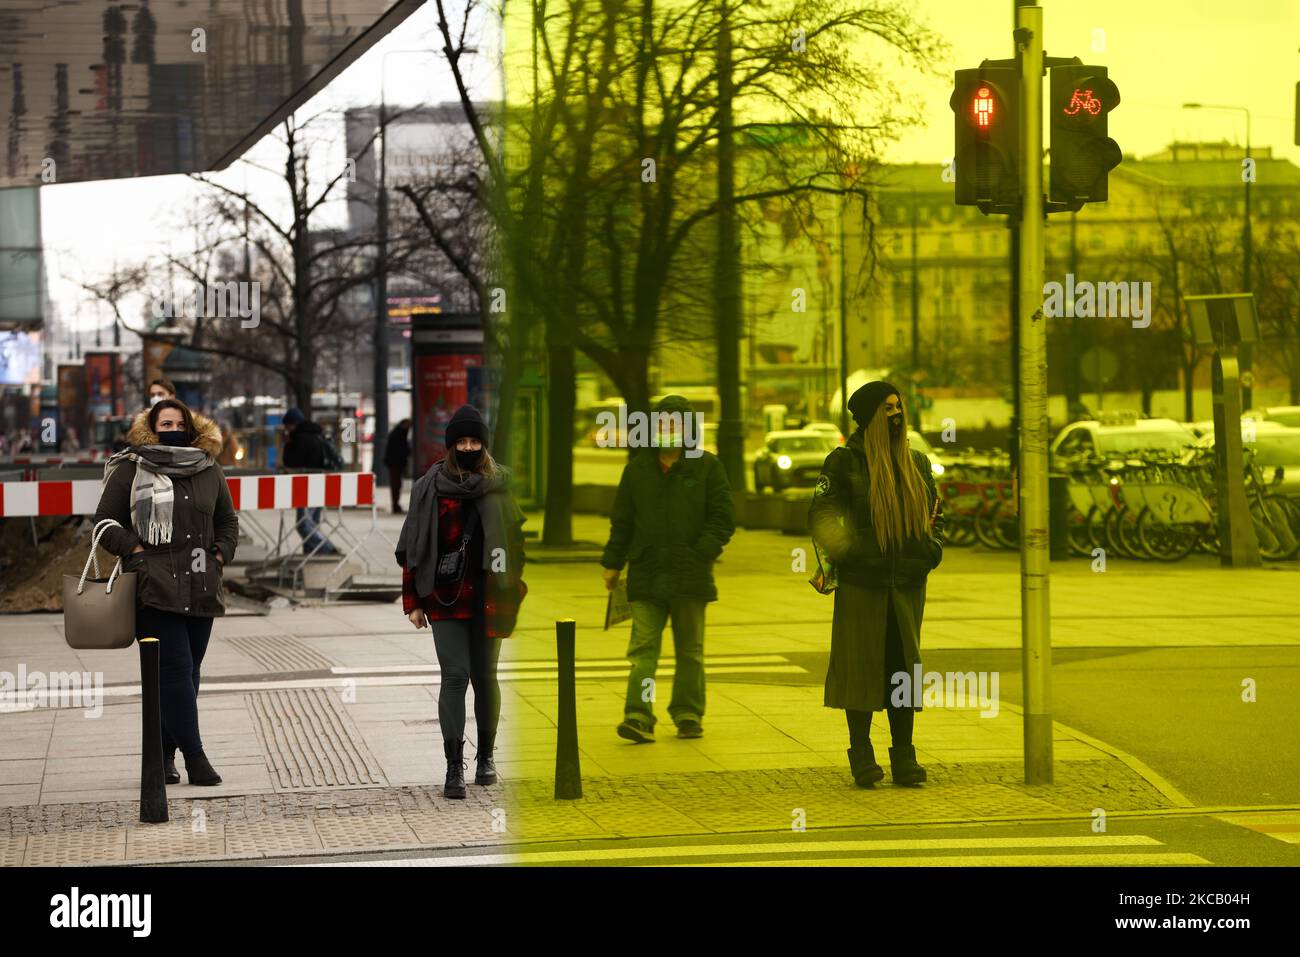 People are seen through a the tinted glass of a subway station at a crossing in Warsaw, Poland on March 15, 2021. The Polish health ministry imposed a lockdown in two counties following a surge in new cases of coronavirus infections. Poland has seen its cases rise sharply and briefly hit the top 5 worldwide in absolute number of deaths. In the Masovian voivodship where the capital Warsaw is located hotels, shopping malls, cinemas and cultural institutions will be closed for two weeks starting March 15. (Photo by Jaap Arriens/NurPhoto) Stock Photo